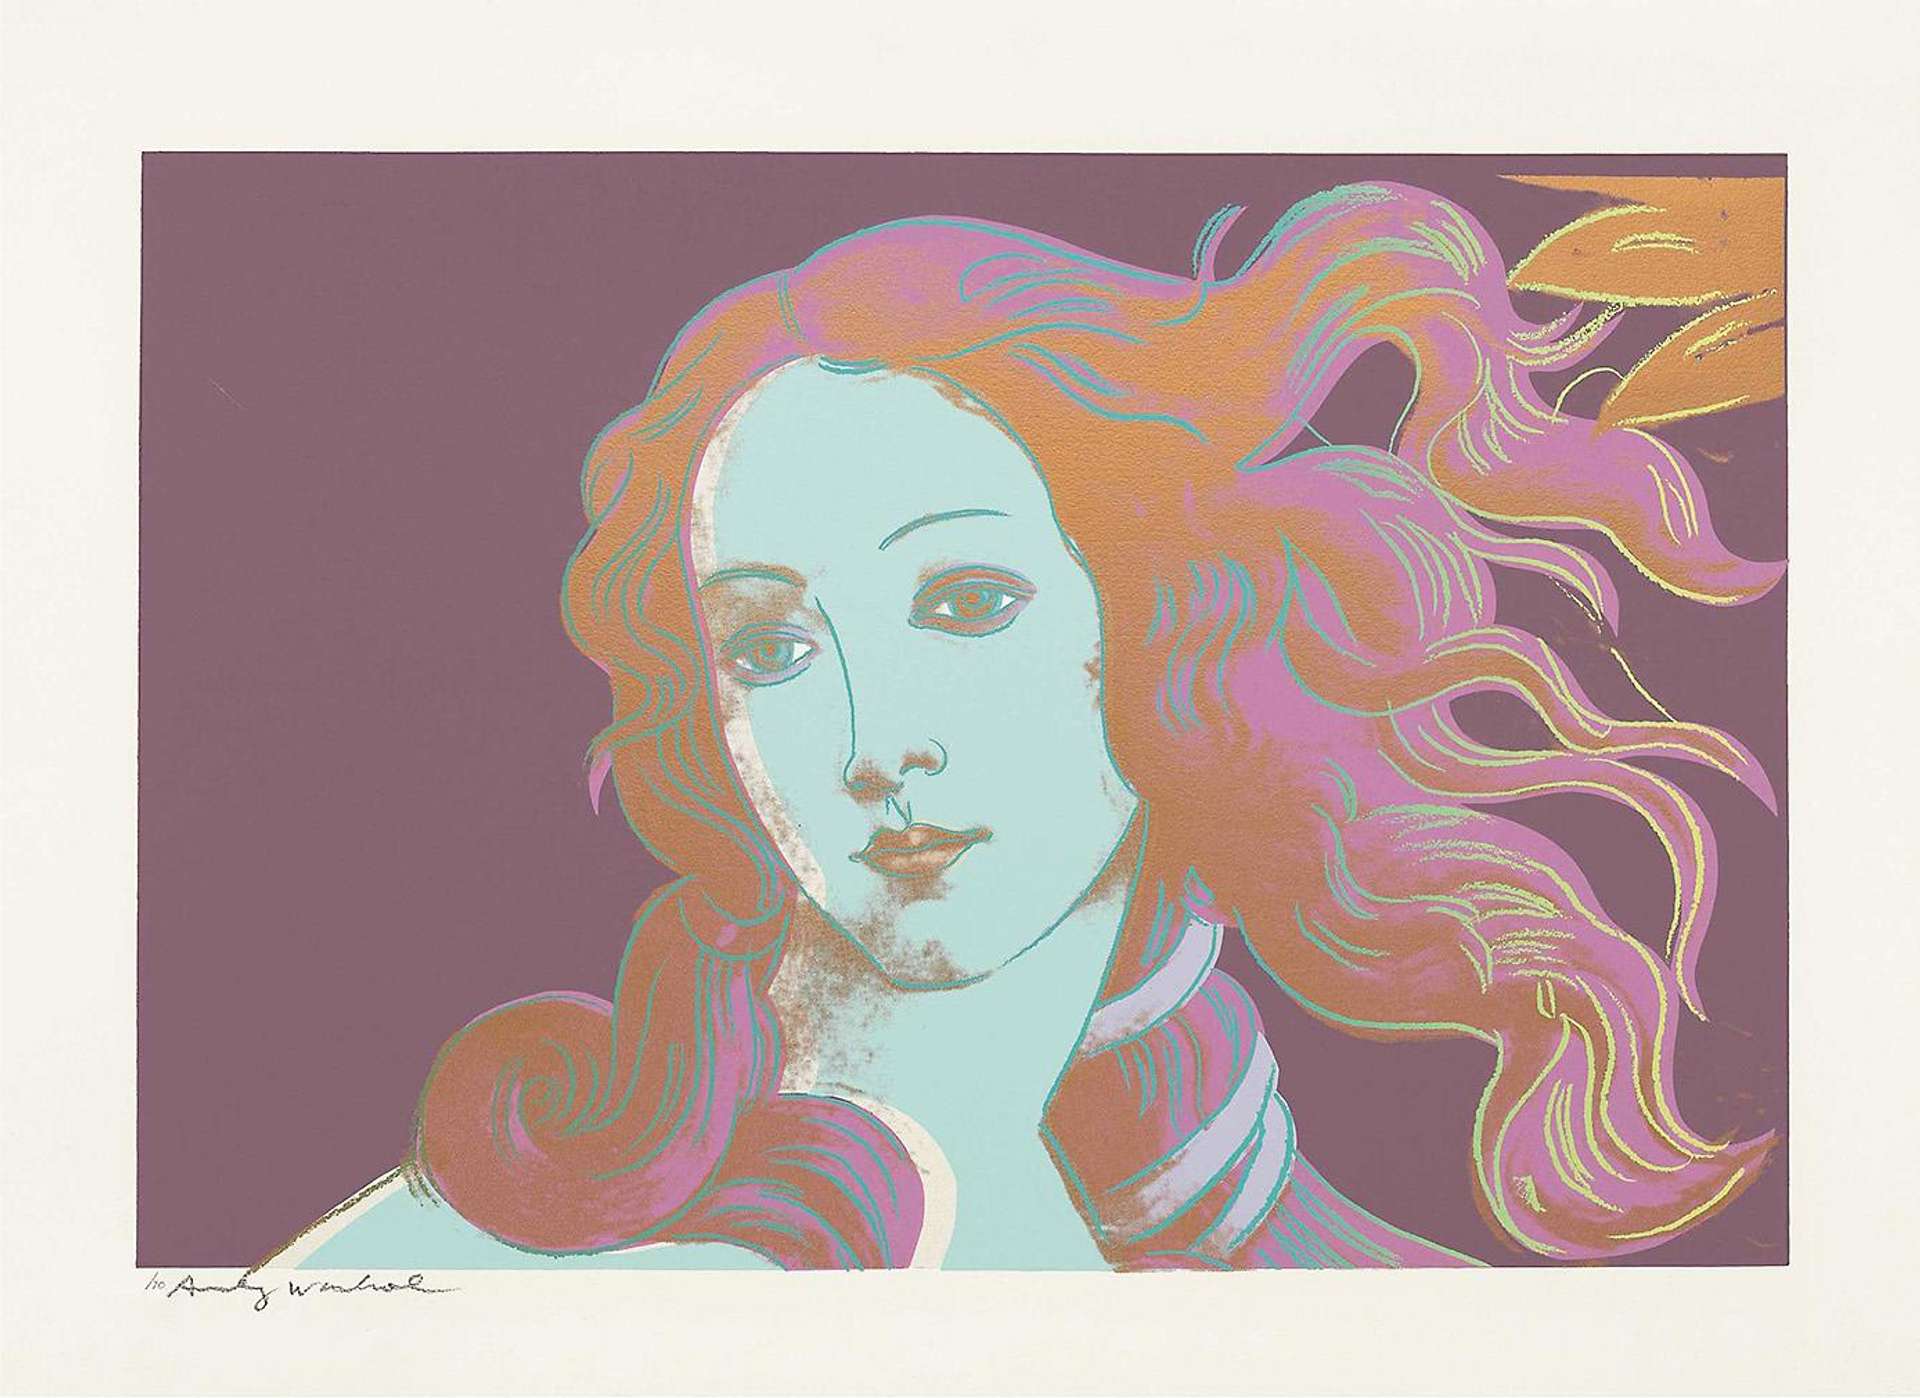 A screenprinted portrait of Sandro Botticelli's "Birth of Venus" in light pink hues. Venus, with flowing hair, is depicted in a gradient from light pink to yellow.